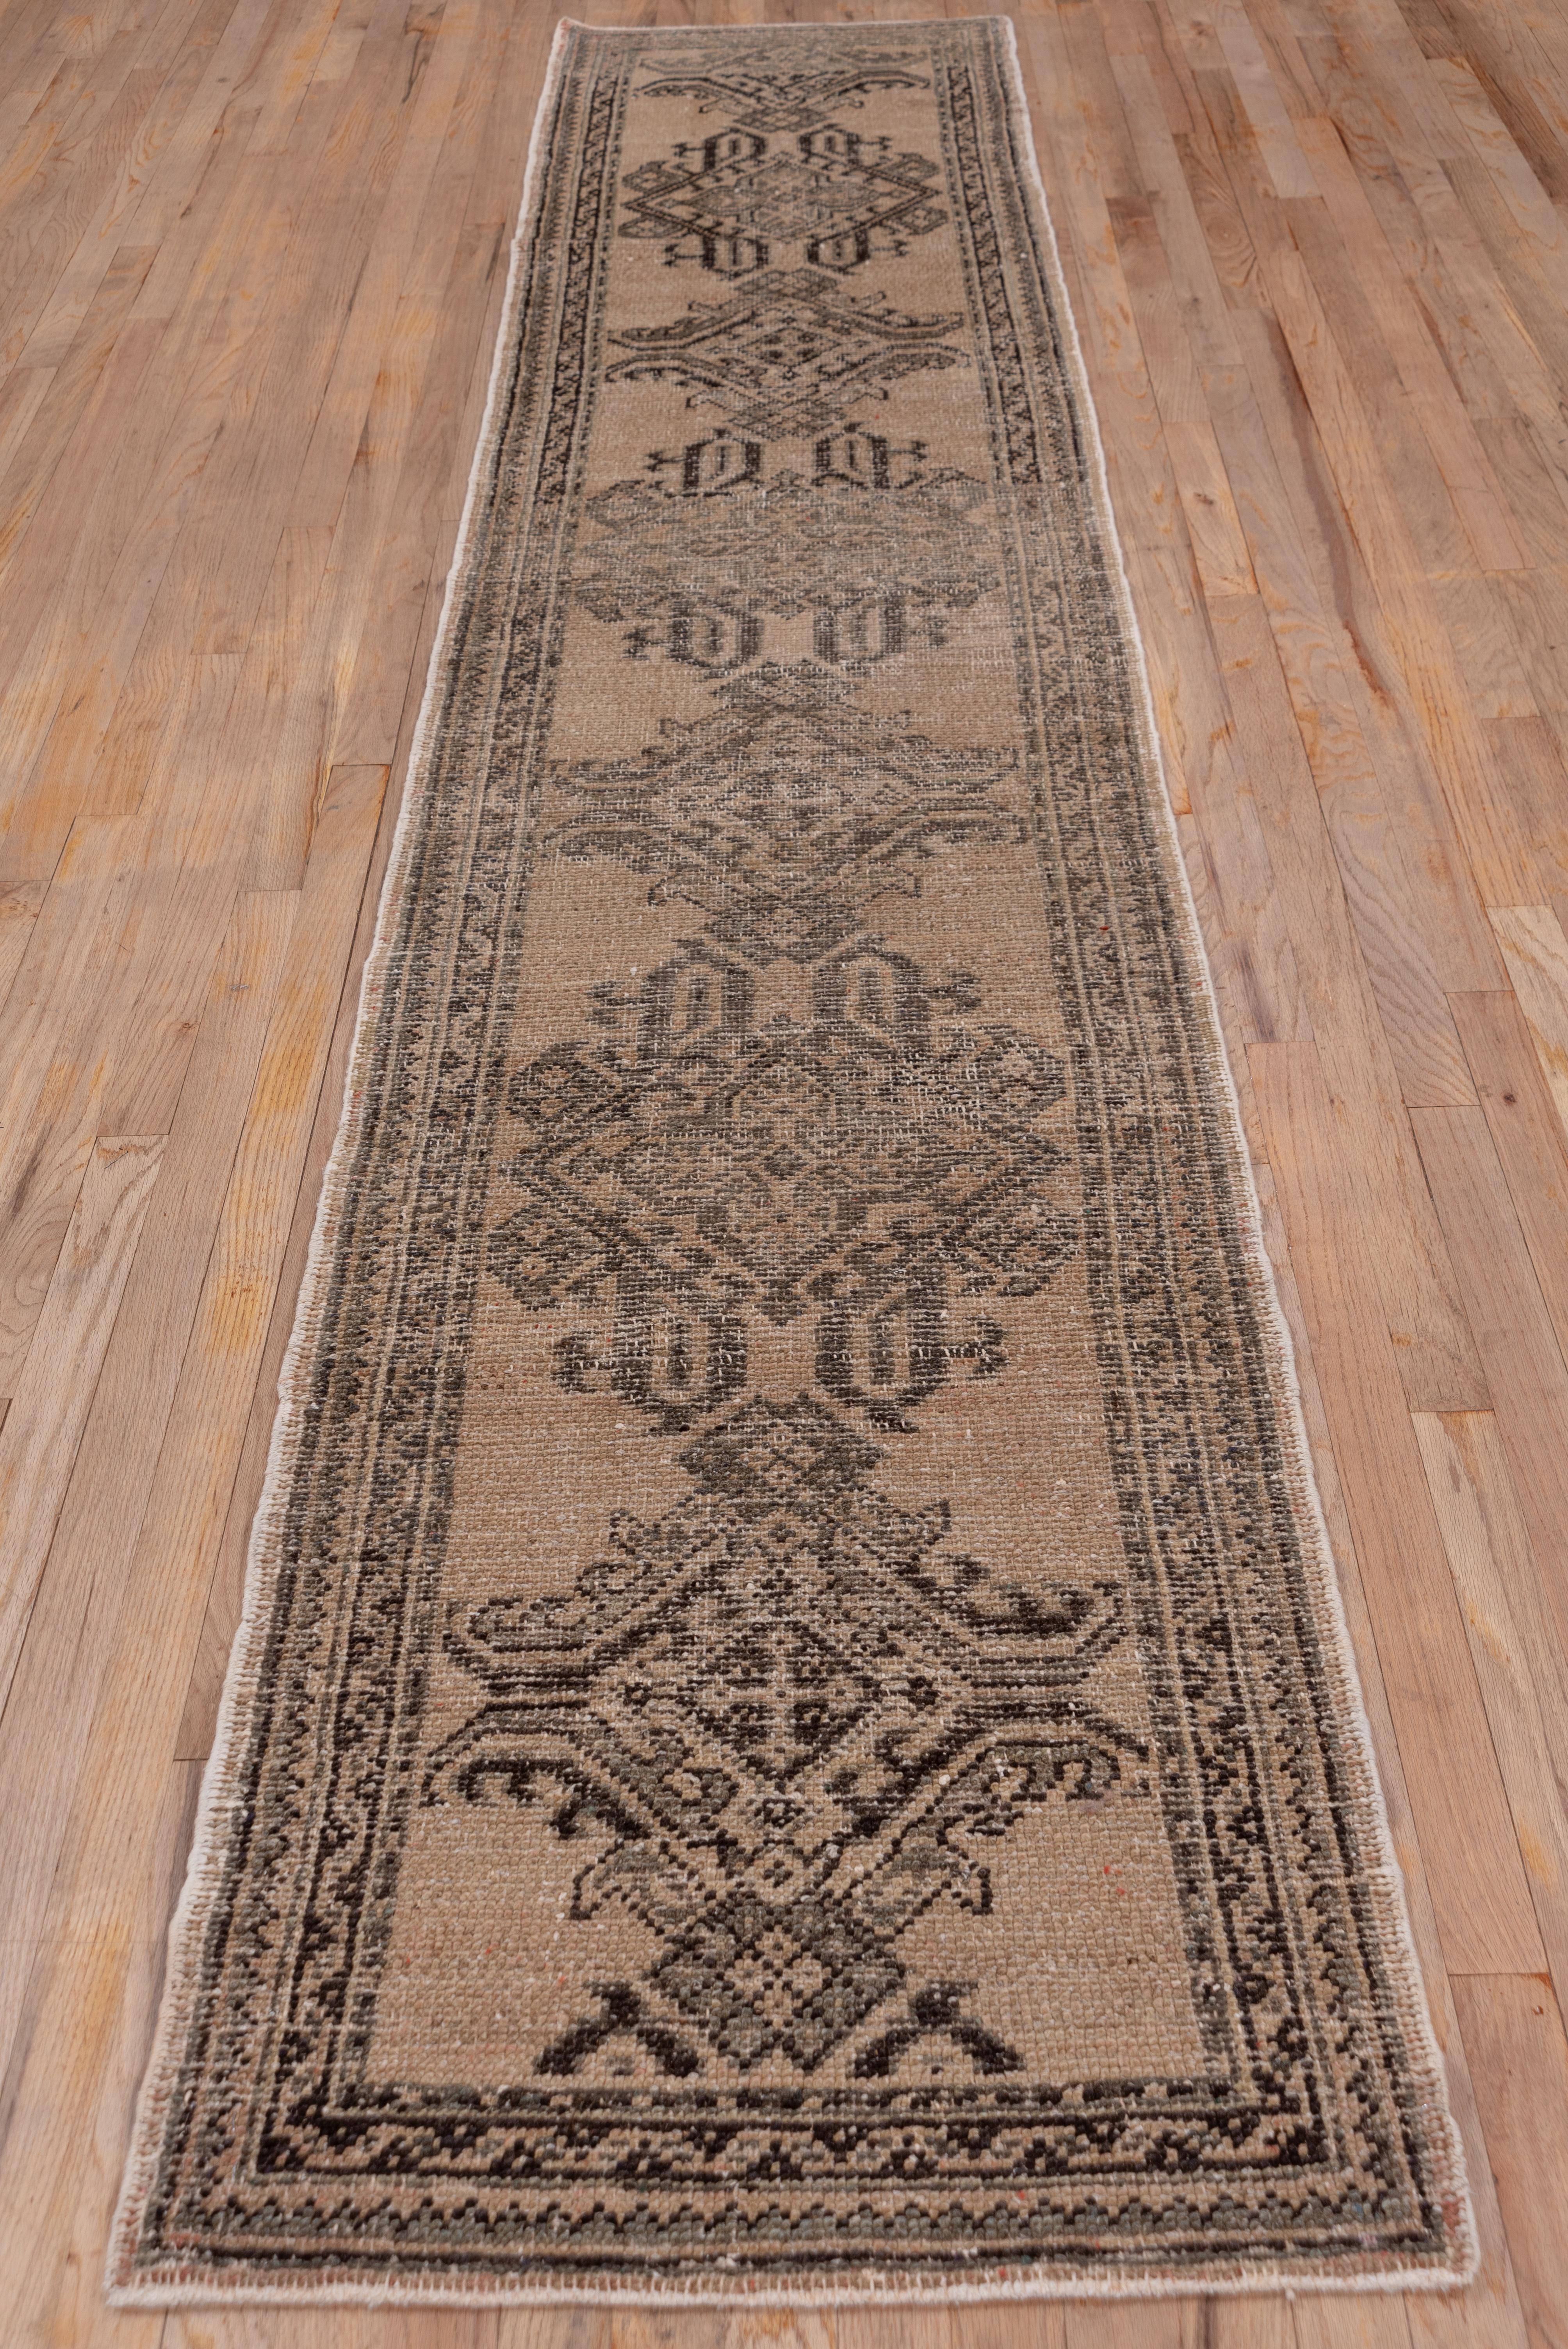 The oatmeal ground of this west Turkish workshop runner displays a single column Yaprak (Leaf) design in dark brown and green, within similarly toned narrow geometric borders.